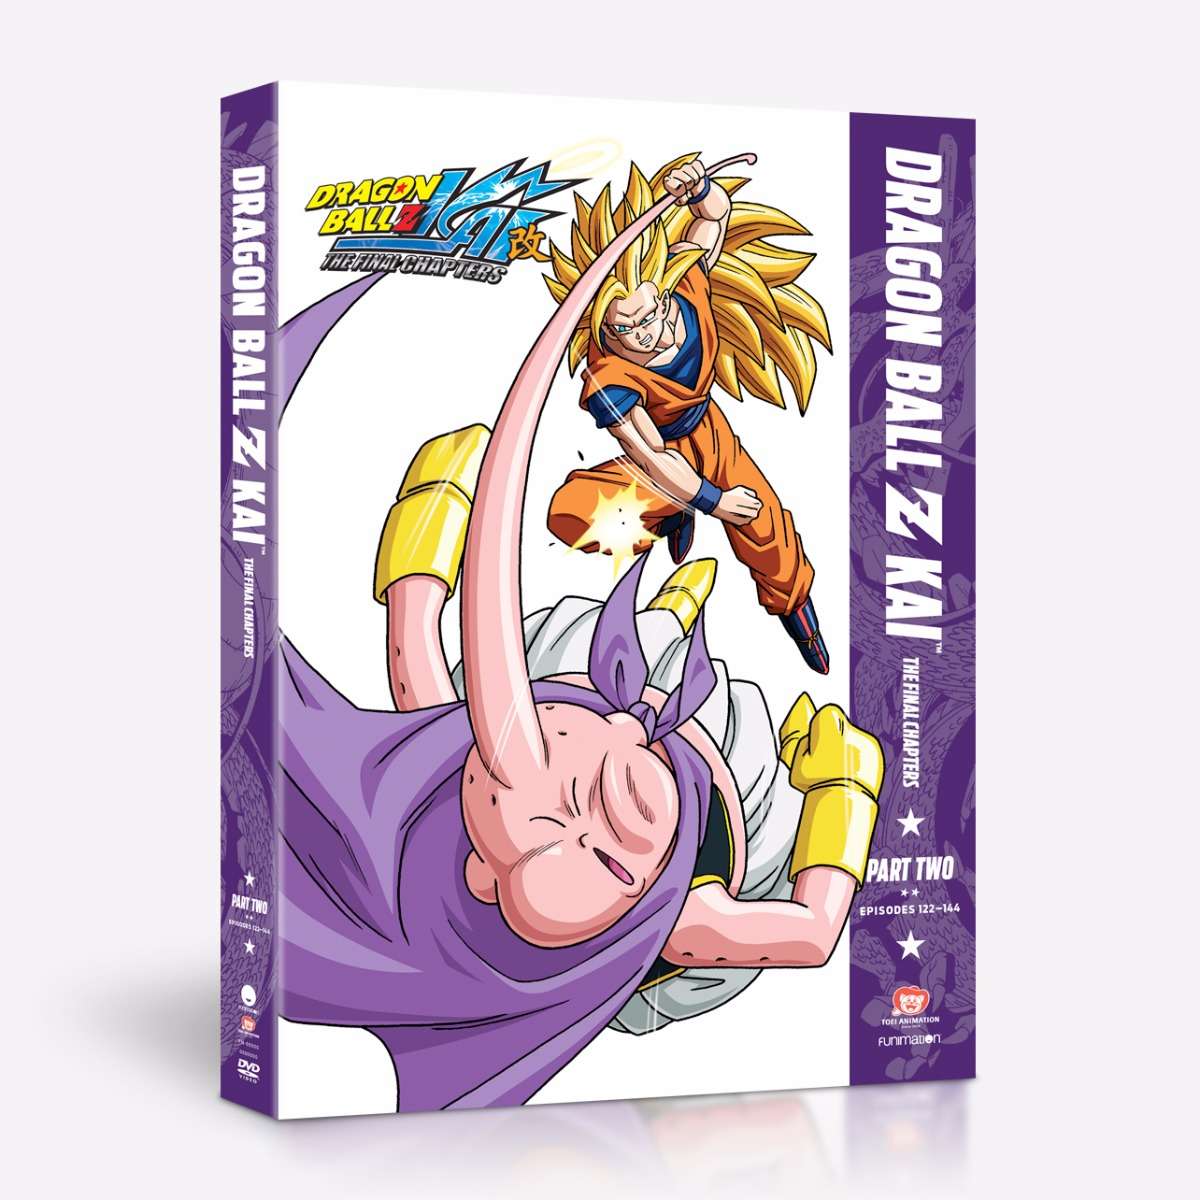 Dragon Ball Z Kai : The Final Chapters - Part 2 - DVD image count 0